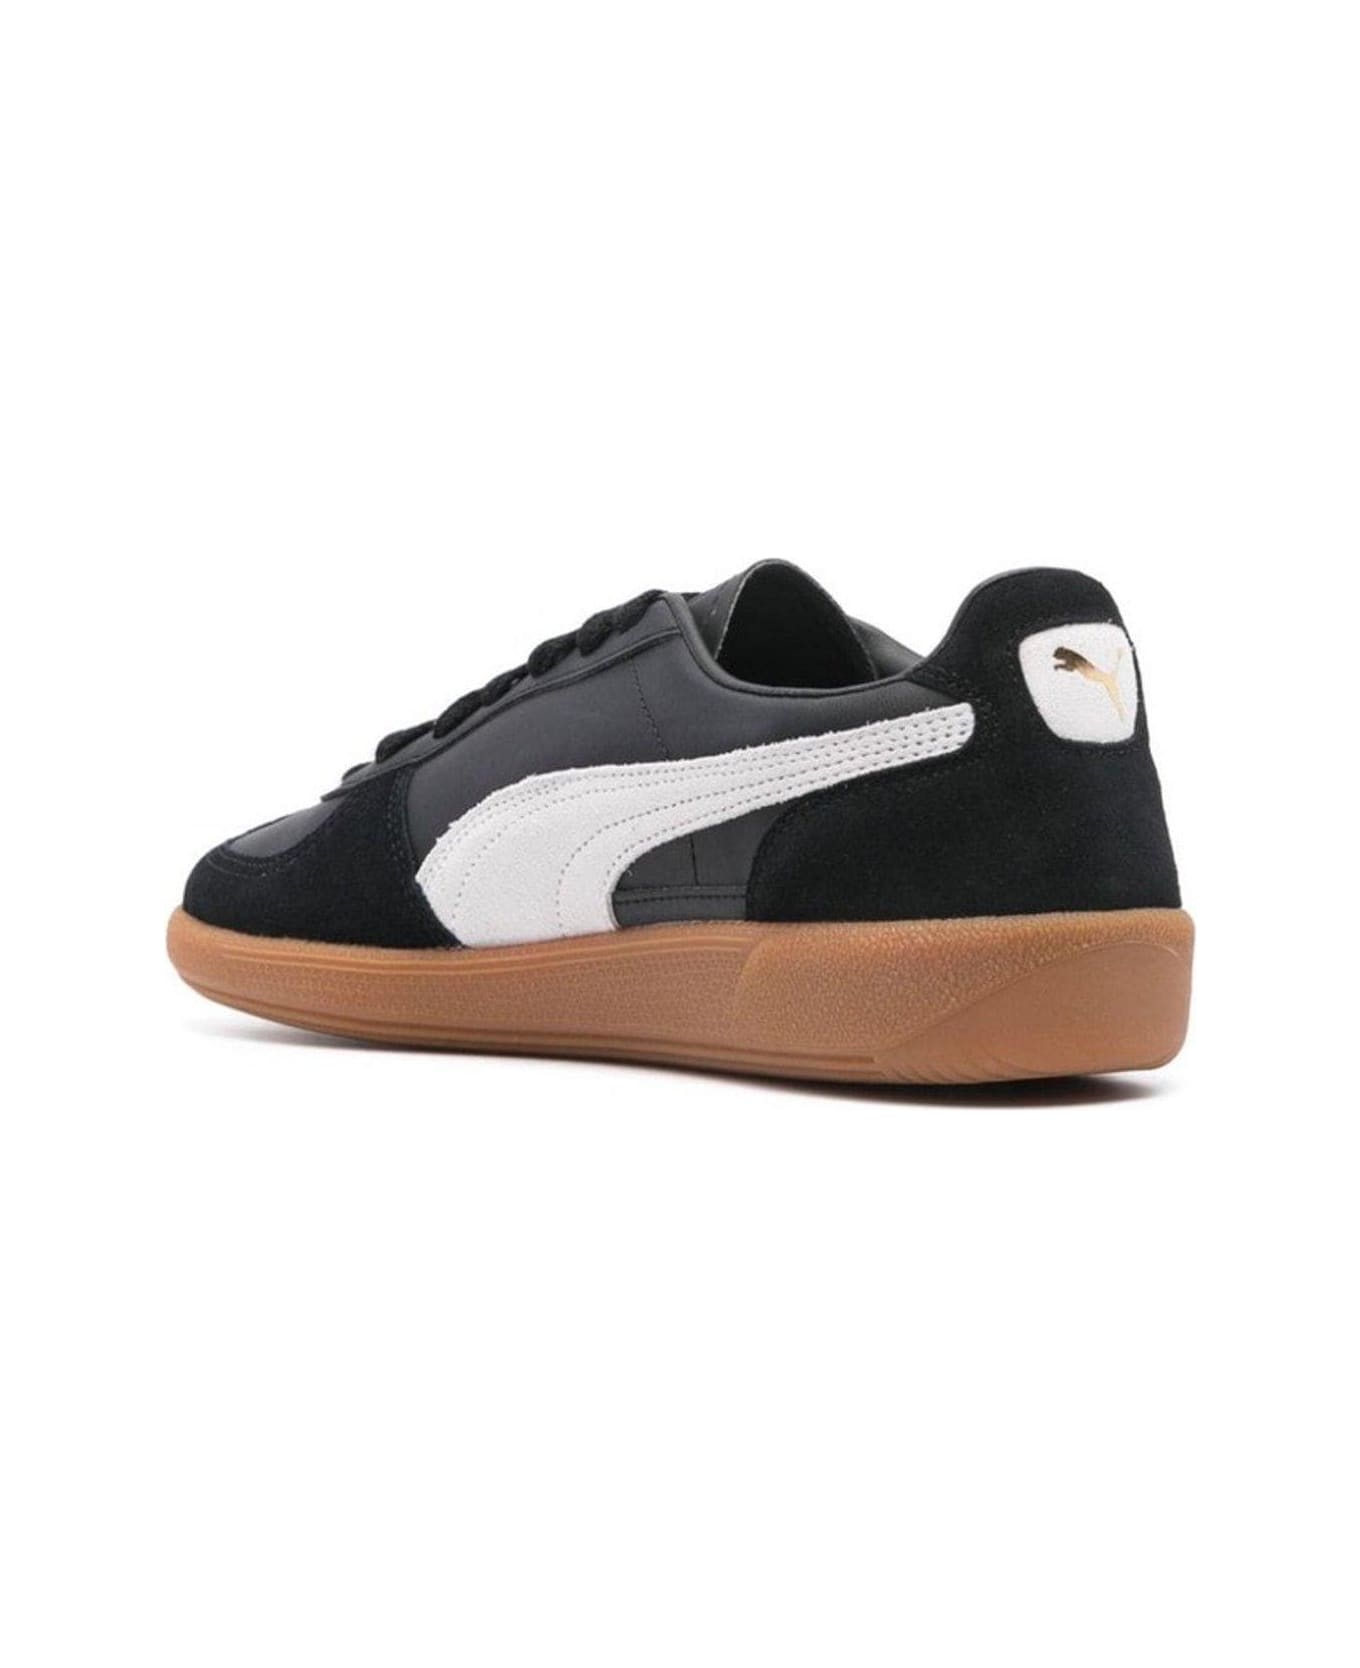 Puma Palermo Lace-up Sneakers - BLACK